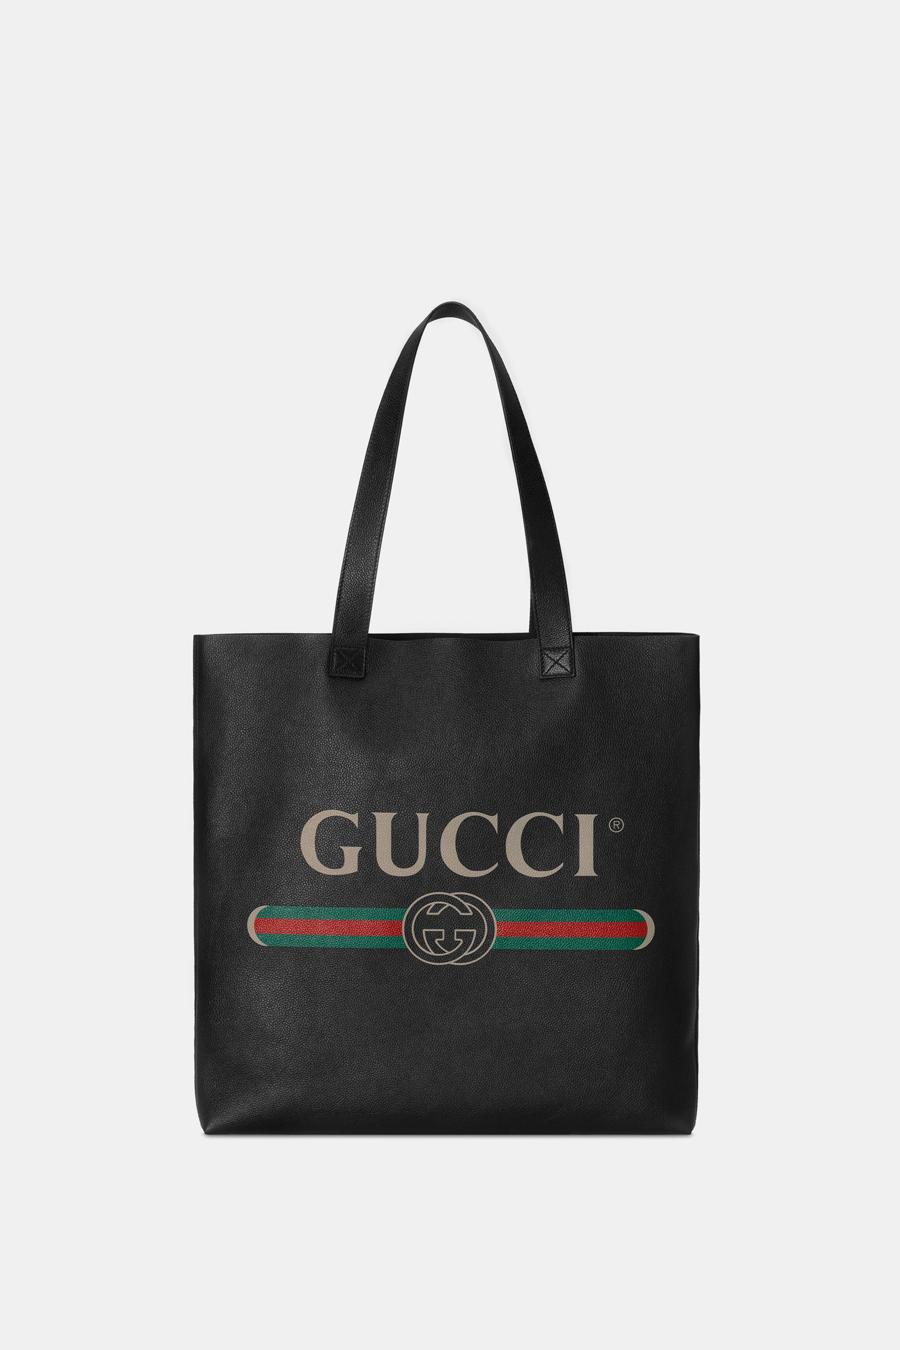 Gucci Logo Tote Hot Sale, UP TO 51% OFF | www.encuentroguionistas.com